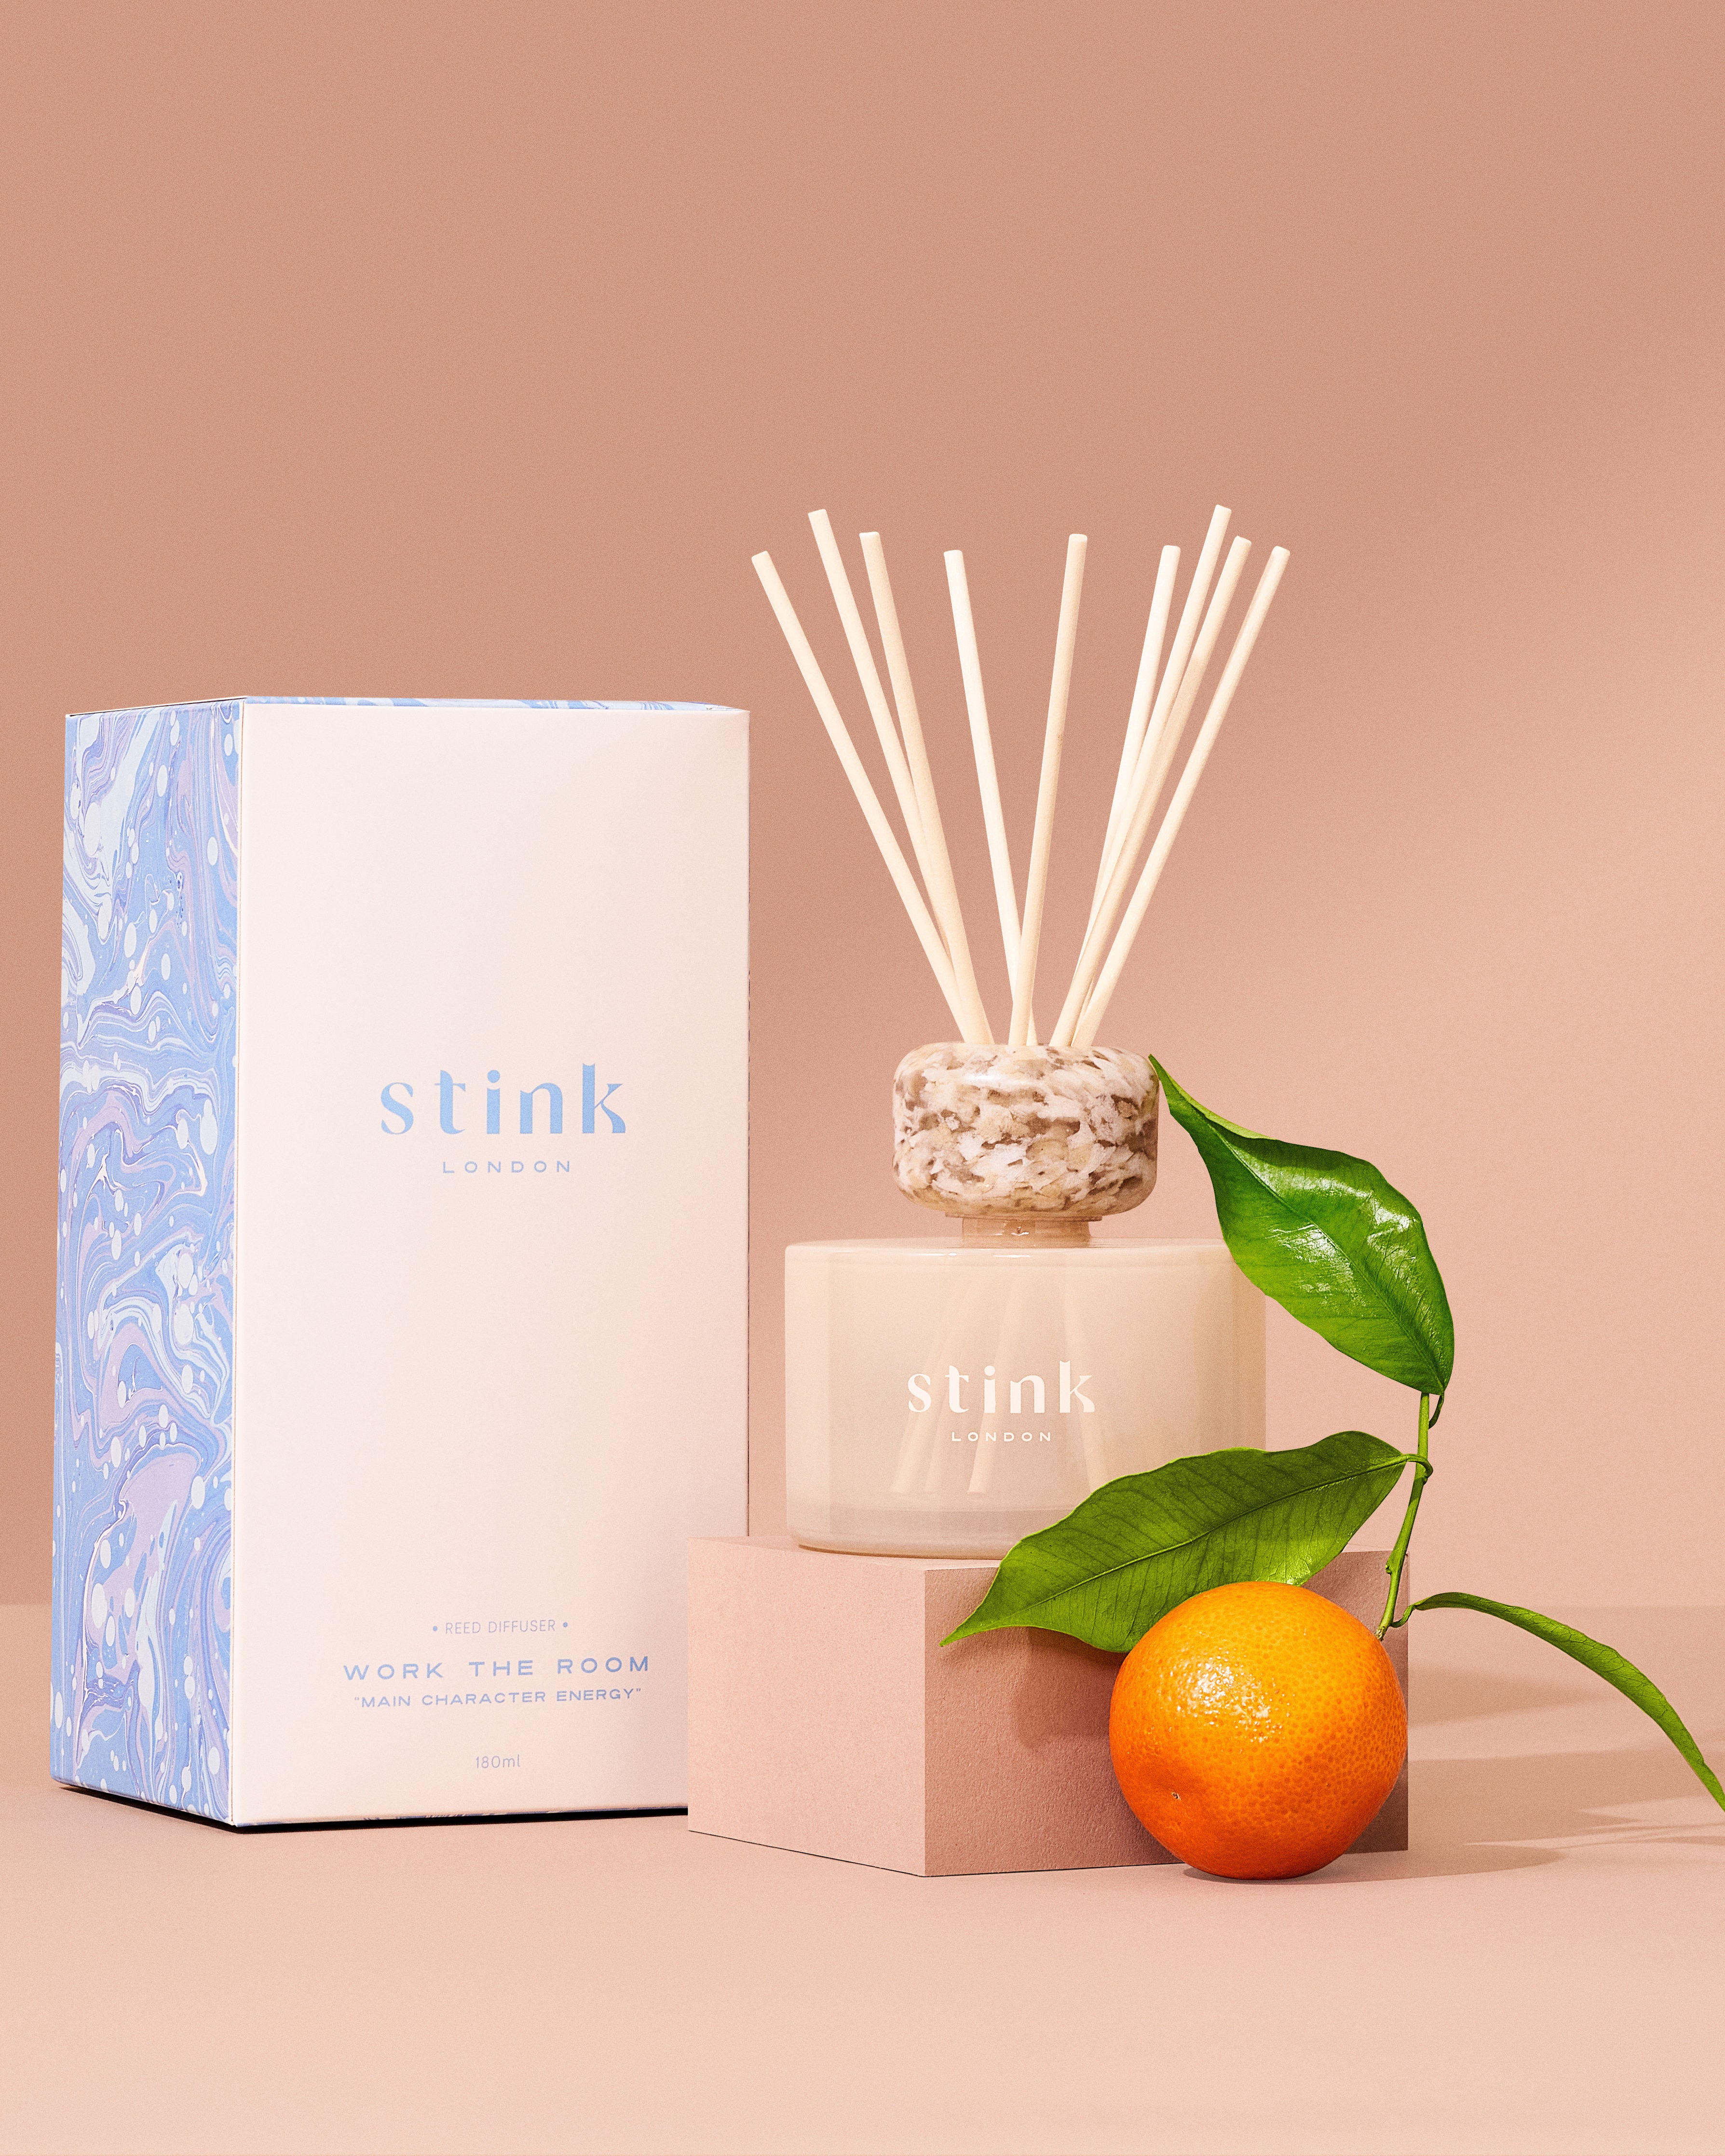 Stink London work the room reed diffuser subscription coconut  refillable refill pouches home fragrance